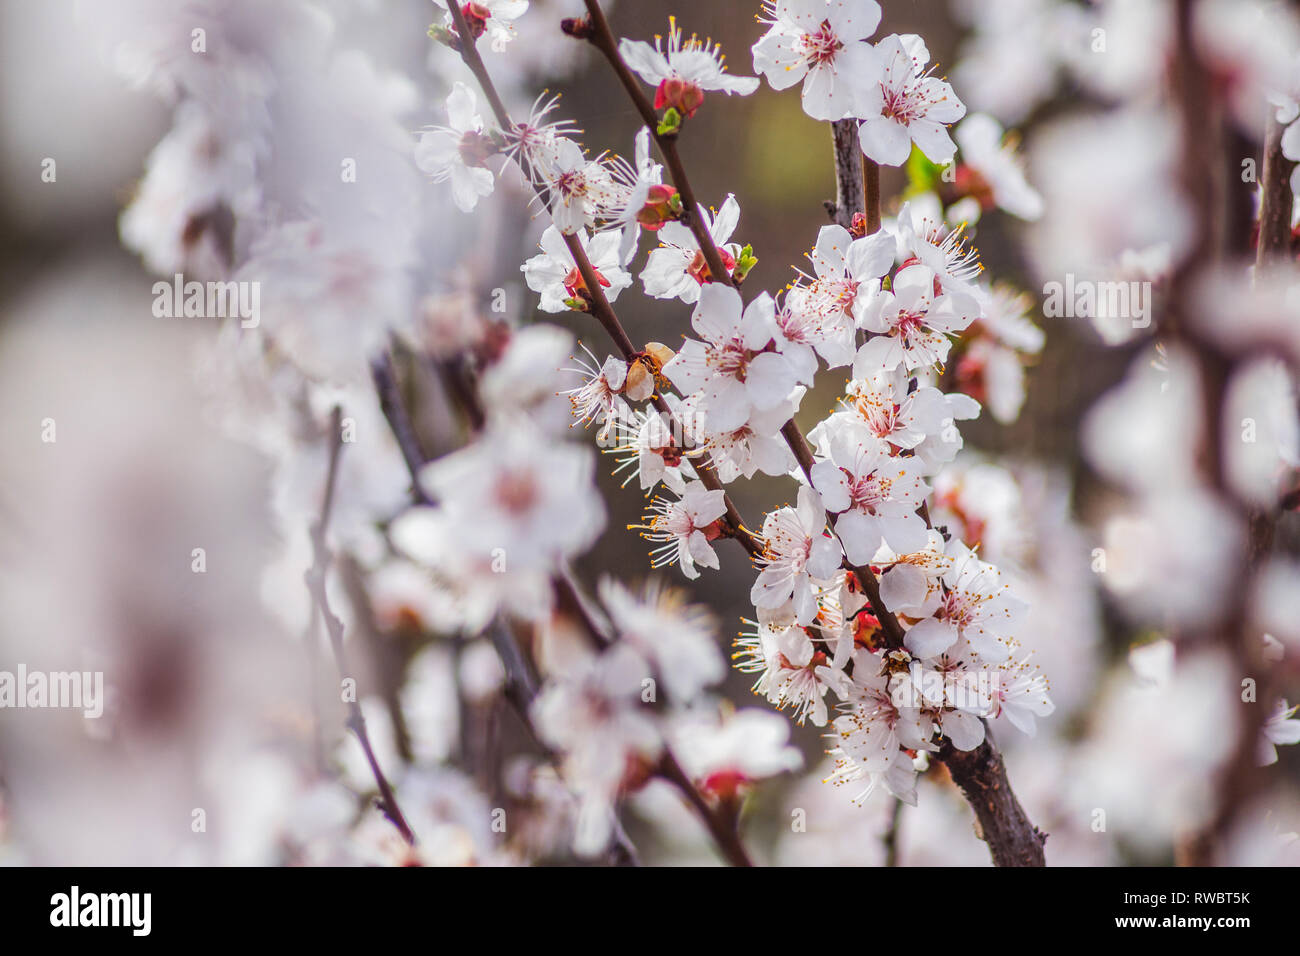 White apricot petals on green background. Apricot blossom close-up macro  view. Spring nature photography Stock Photo - Alamy